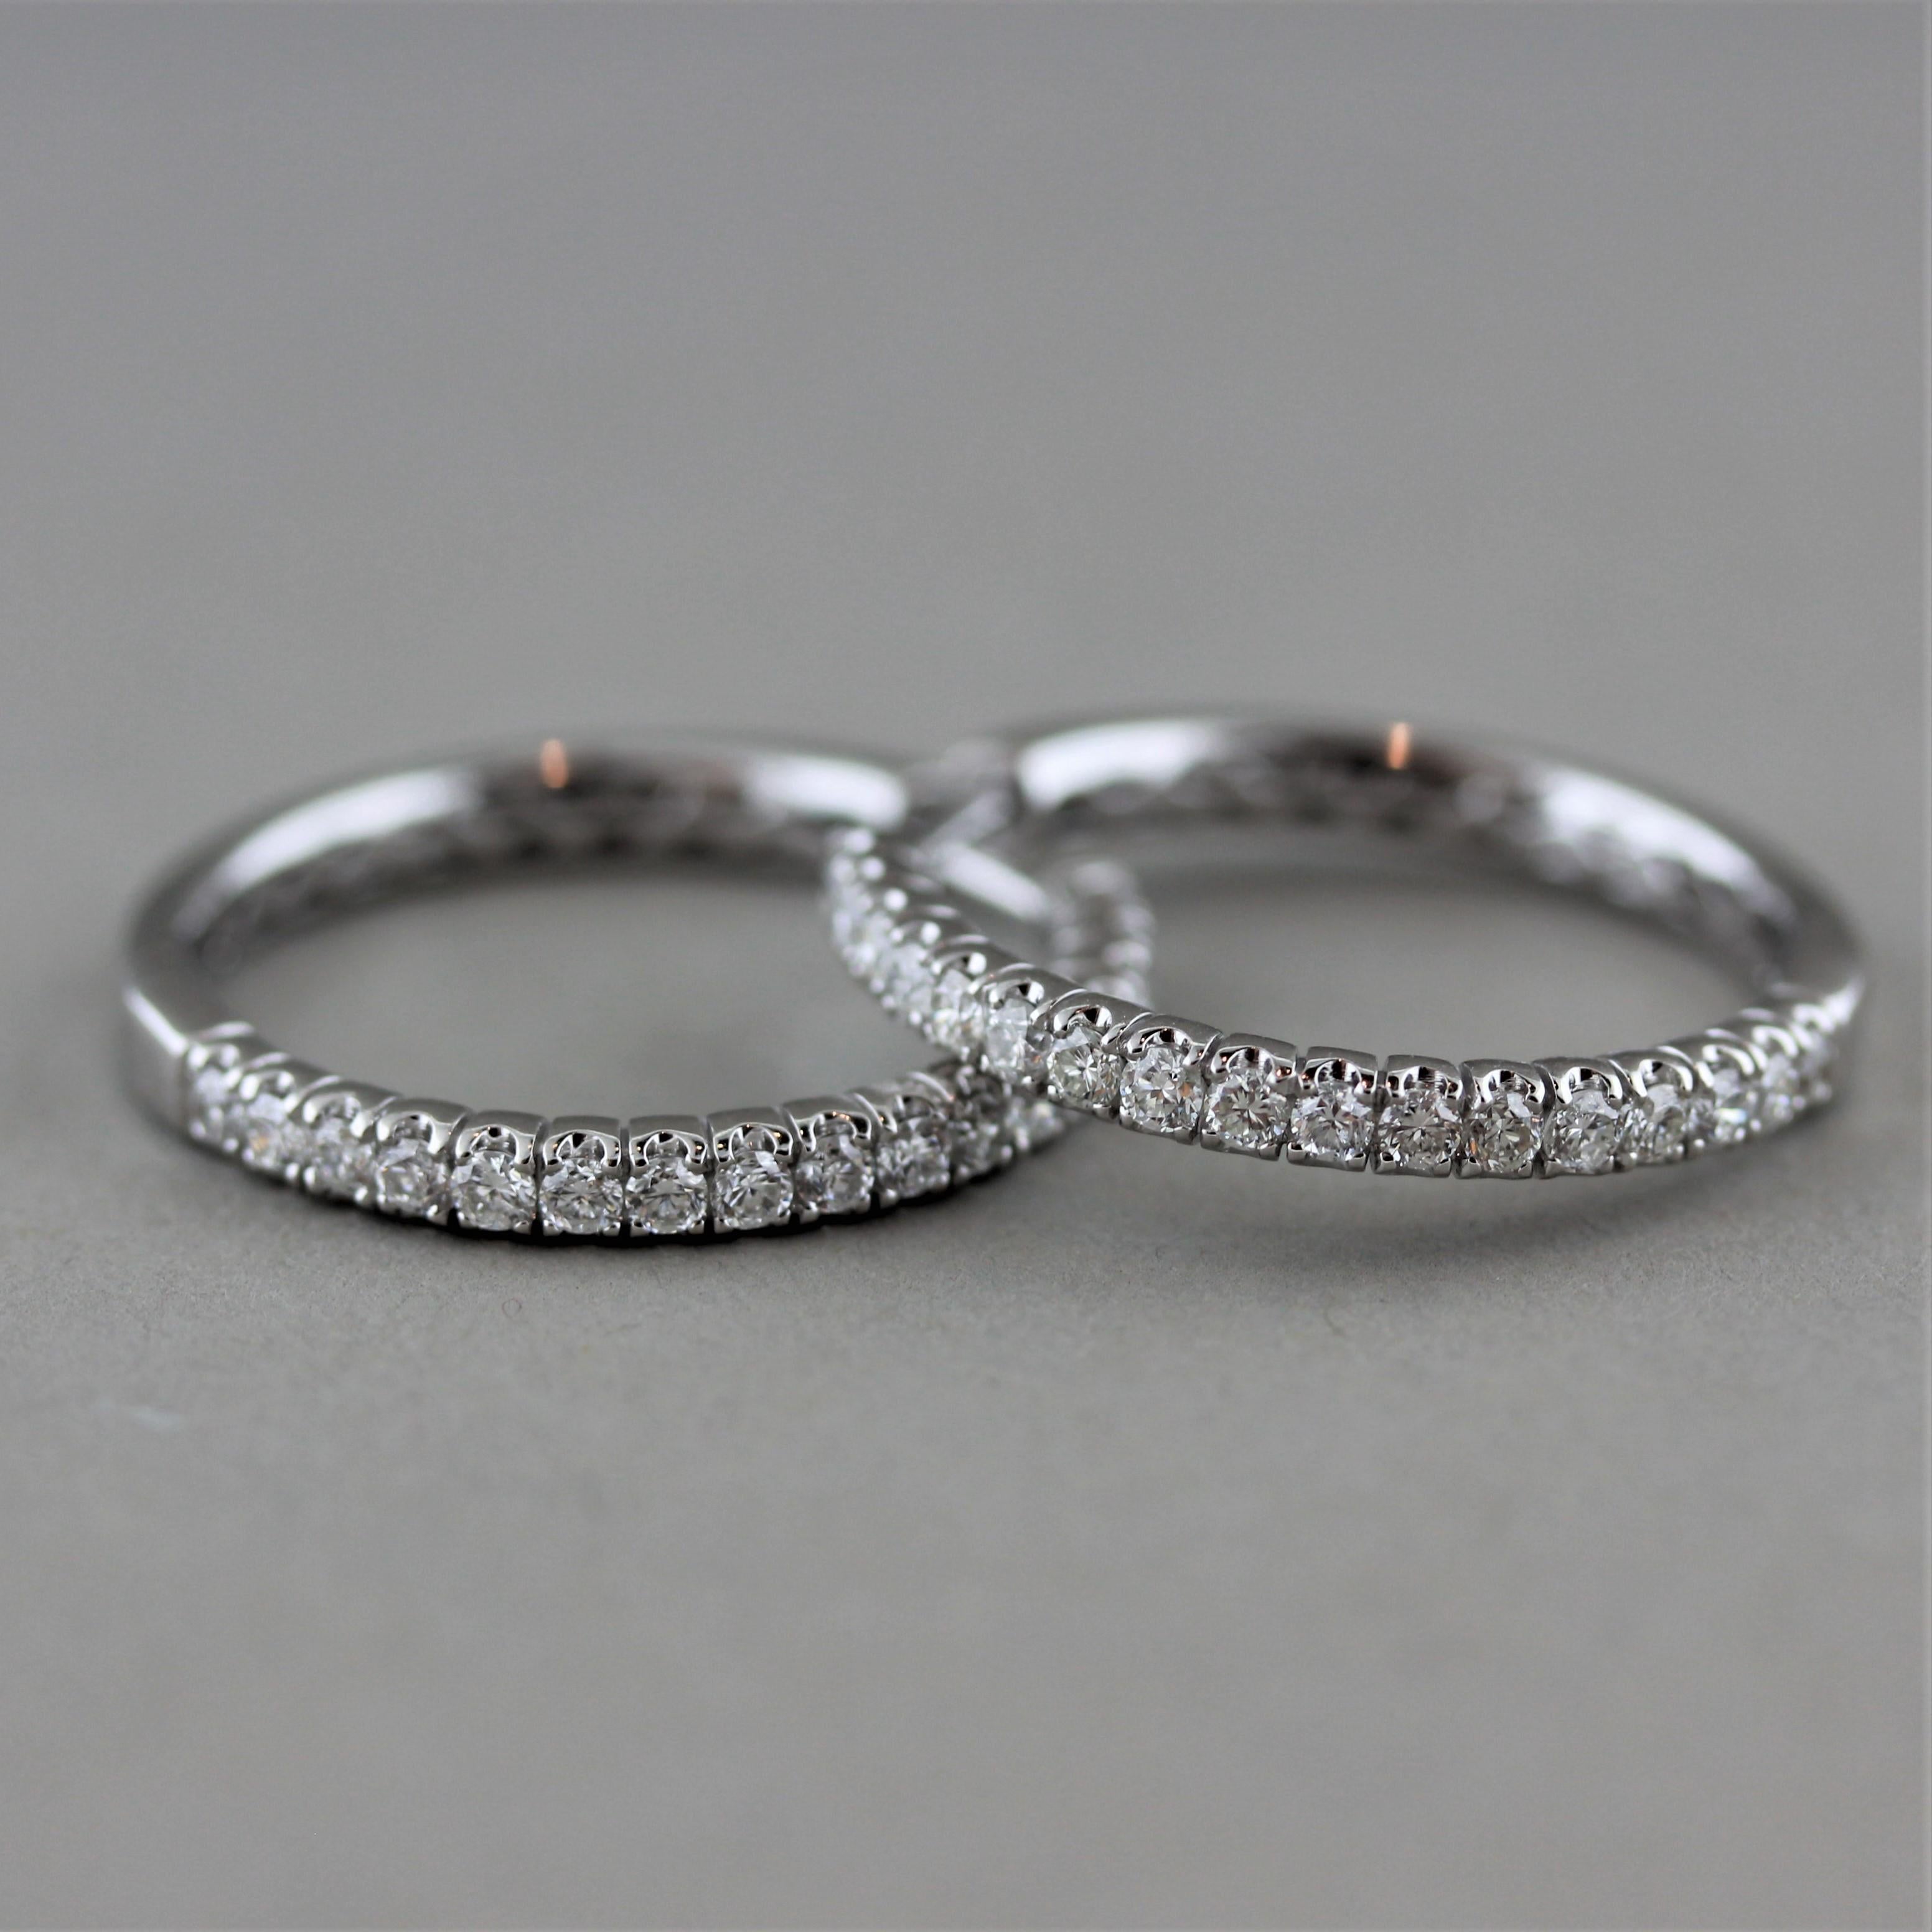 A classic pair of hoop earrings featuring 1.14 carats of round brilliant cut diamonds. Made in 18k whtie gold these earrings can be worn everyday. 


 Length: 1 inch
